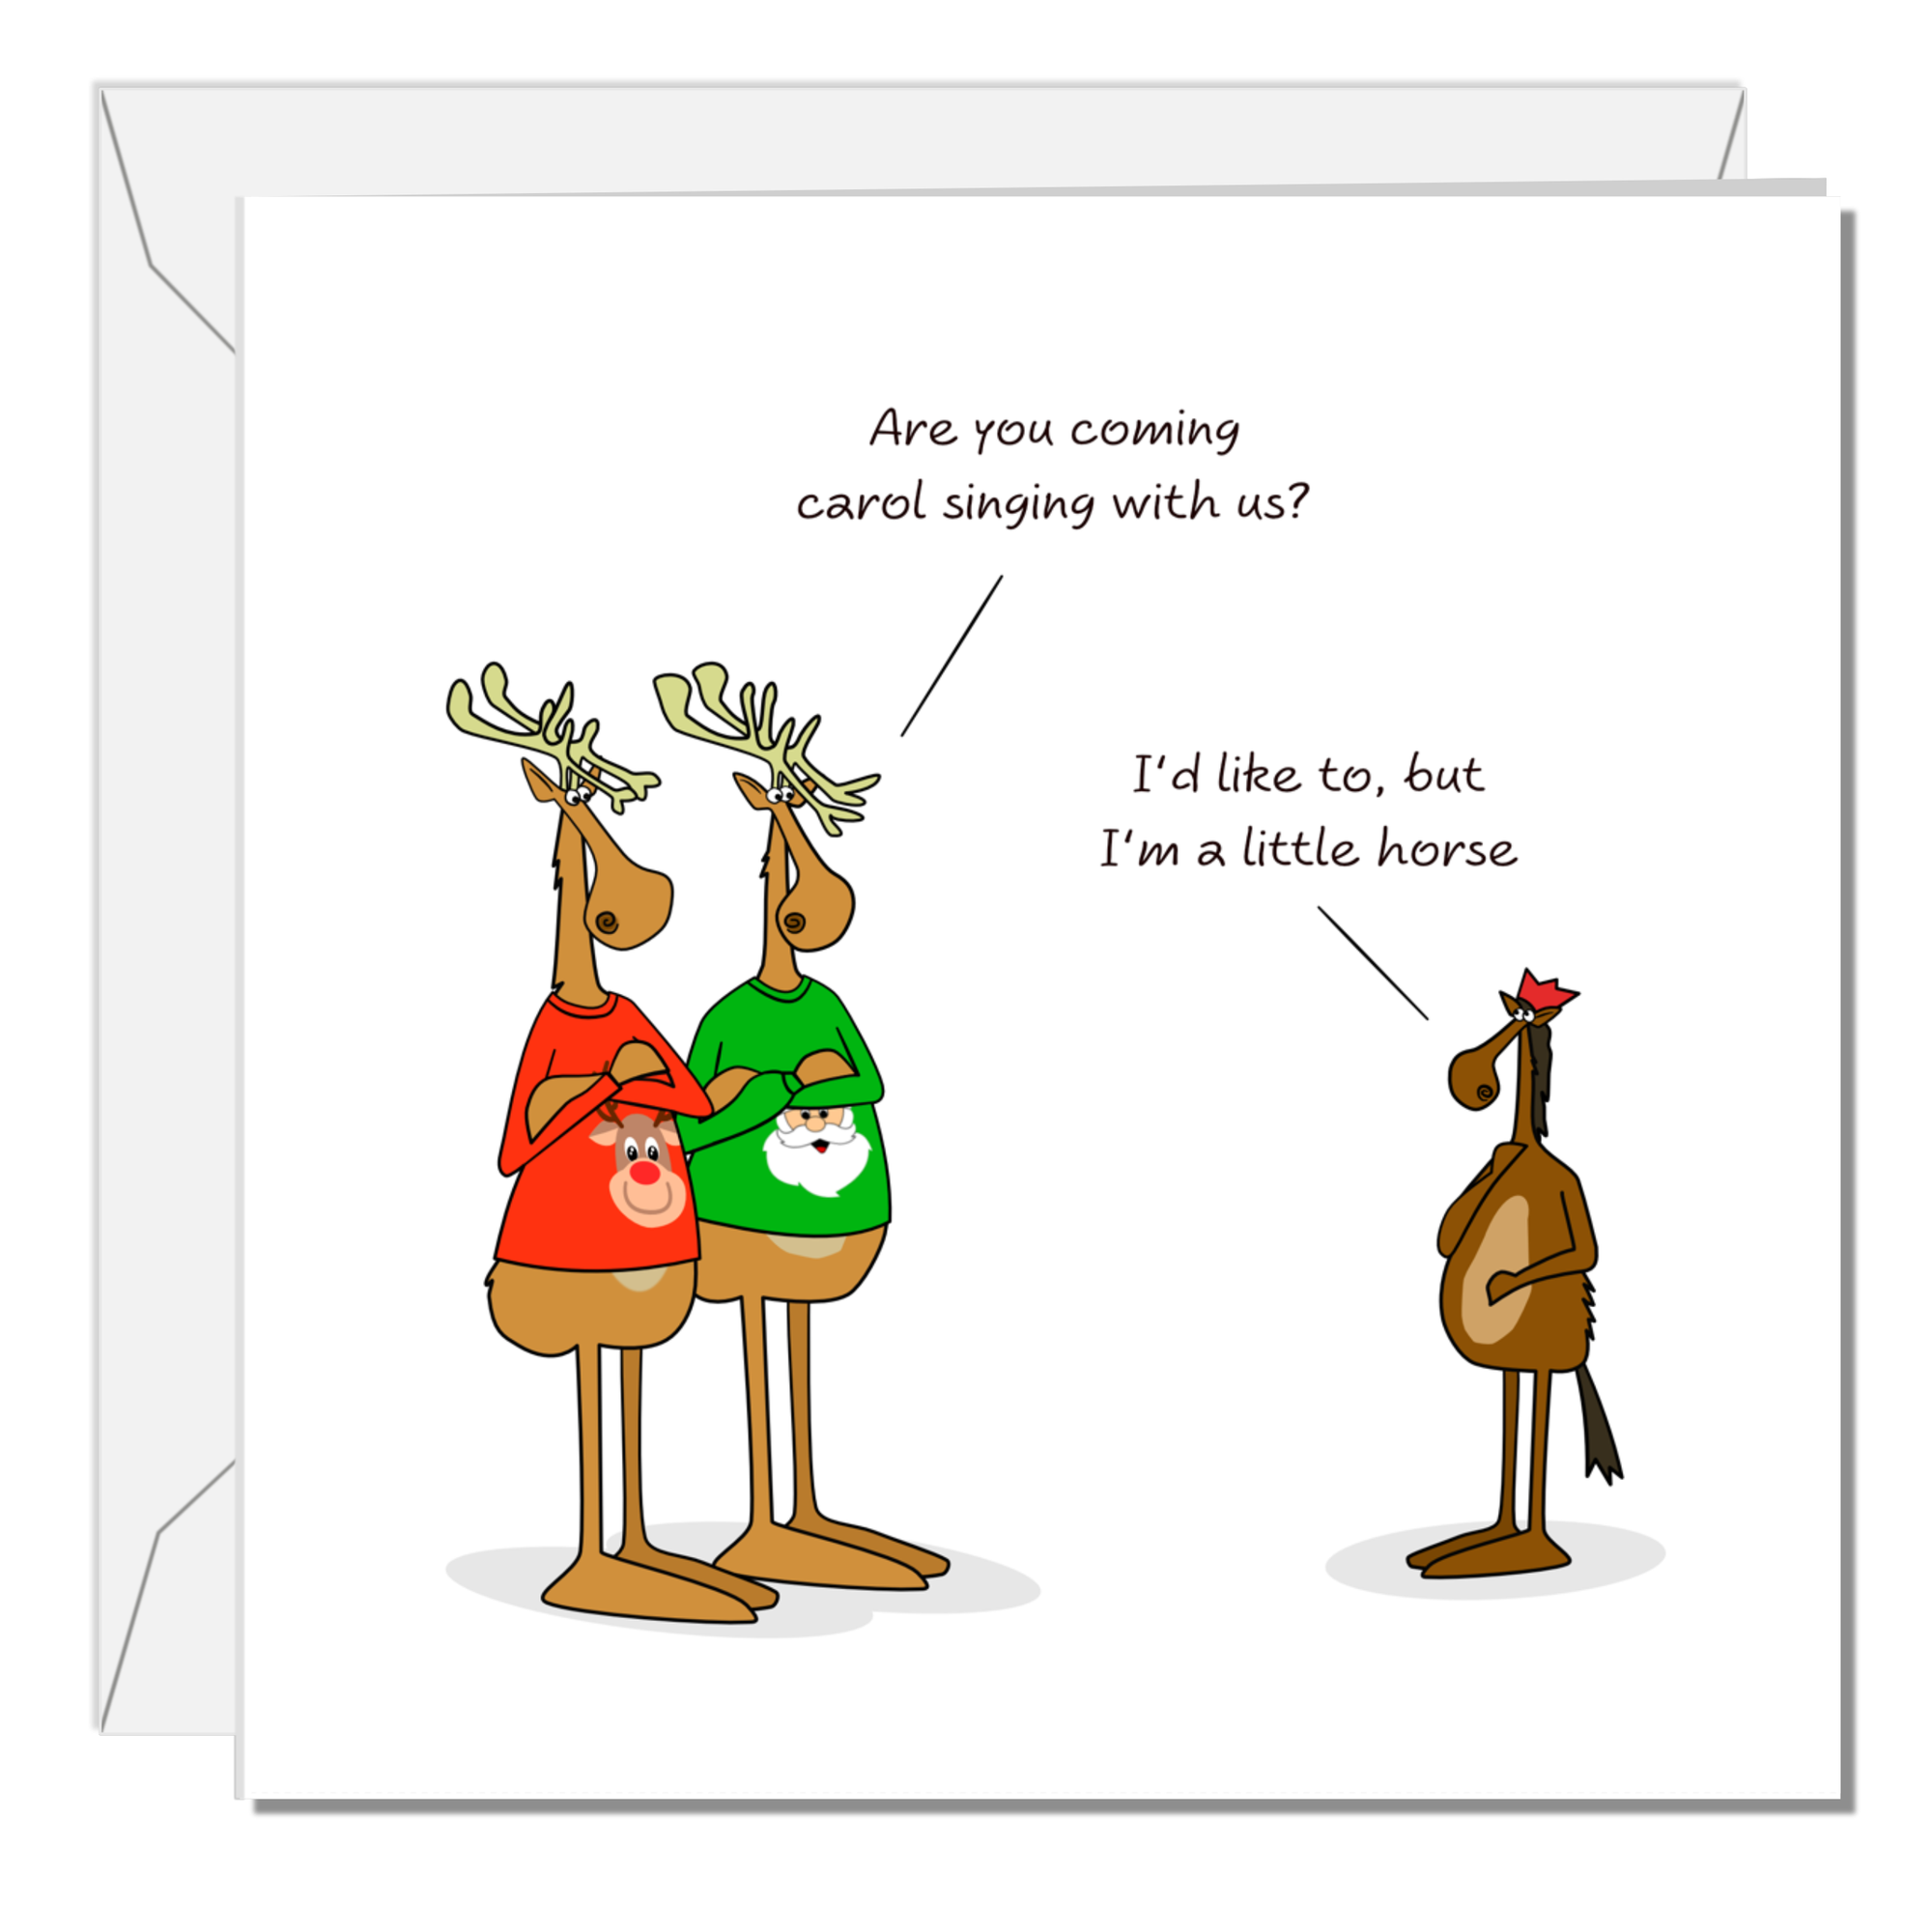 Funny Christmas Card for all the family, friends, children, work colleague - humorous reindeer horse cartoon. Cheeky cute design by Swizzoo